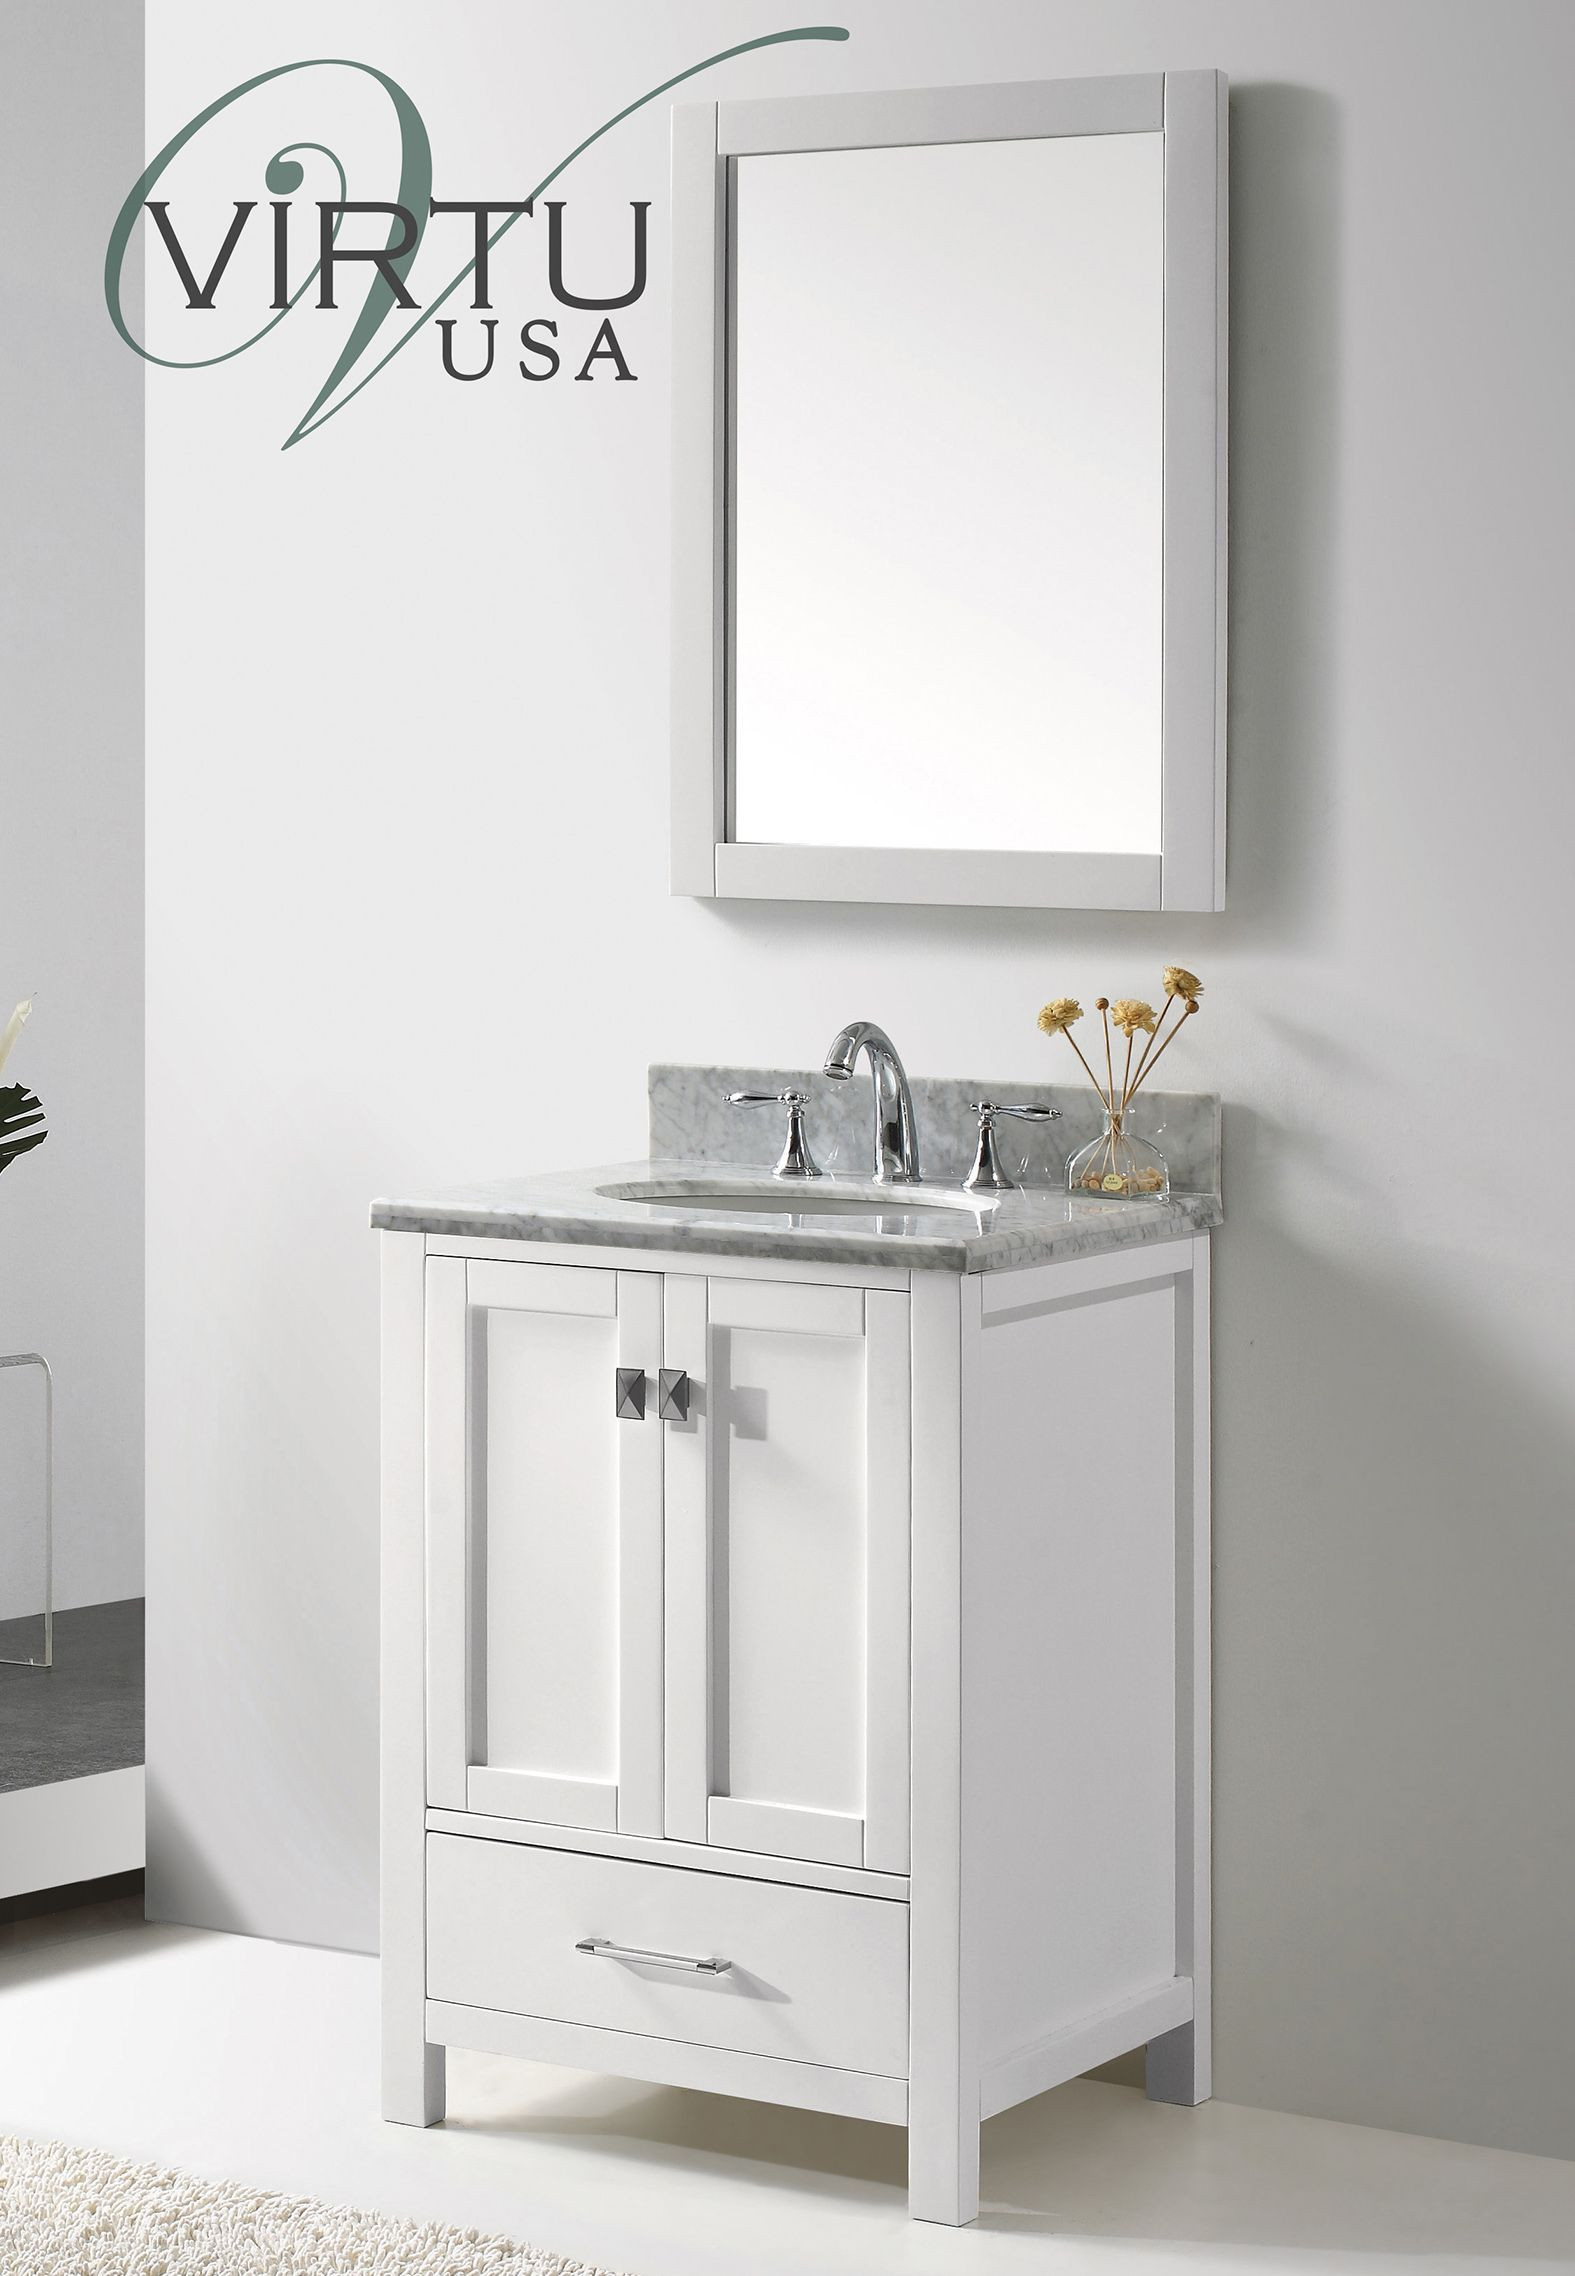 21 Inch Bathroom Vanity
 21 Inch Bathroom Vanity Sink All About Bathroom